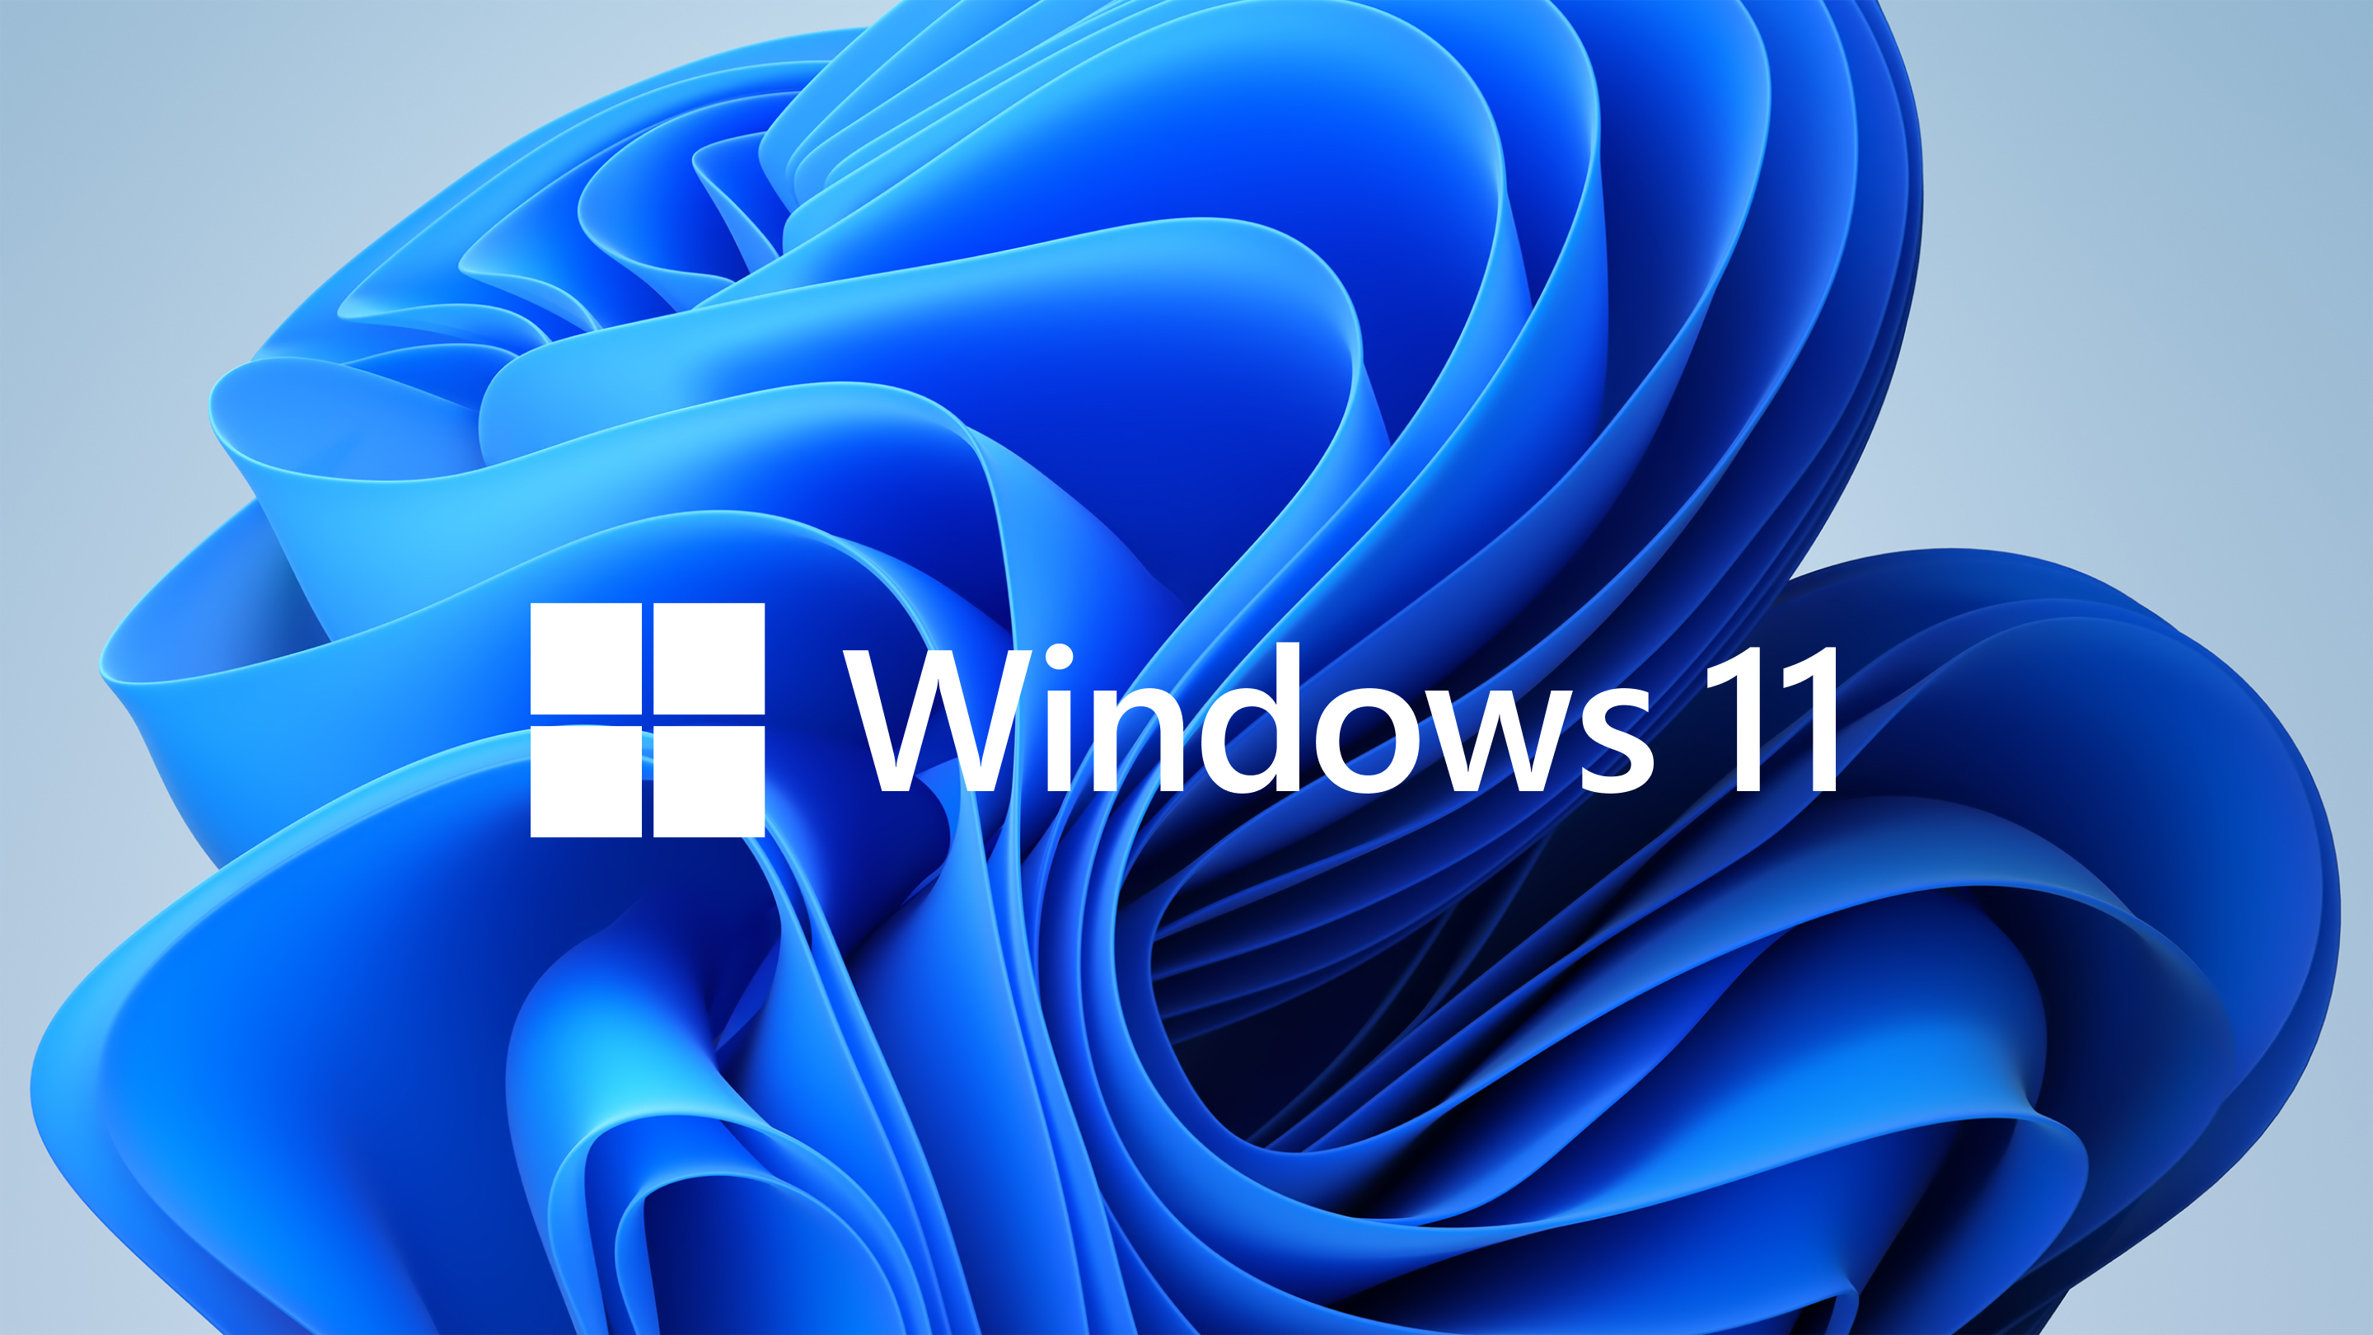 Windows 11 is Coming Exzel IT Consulting